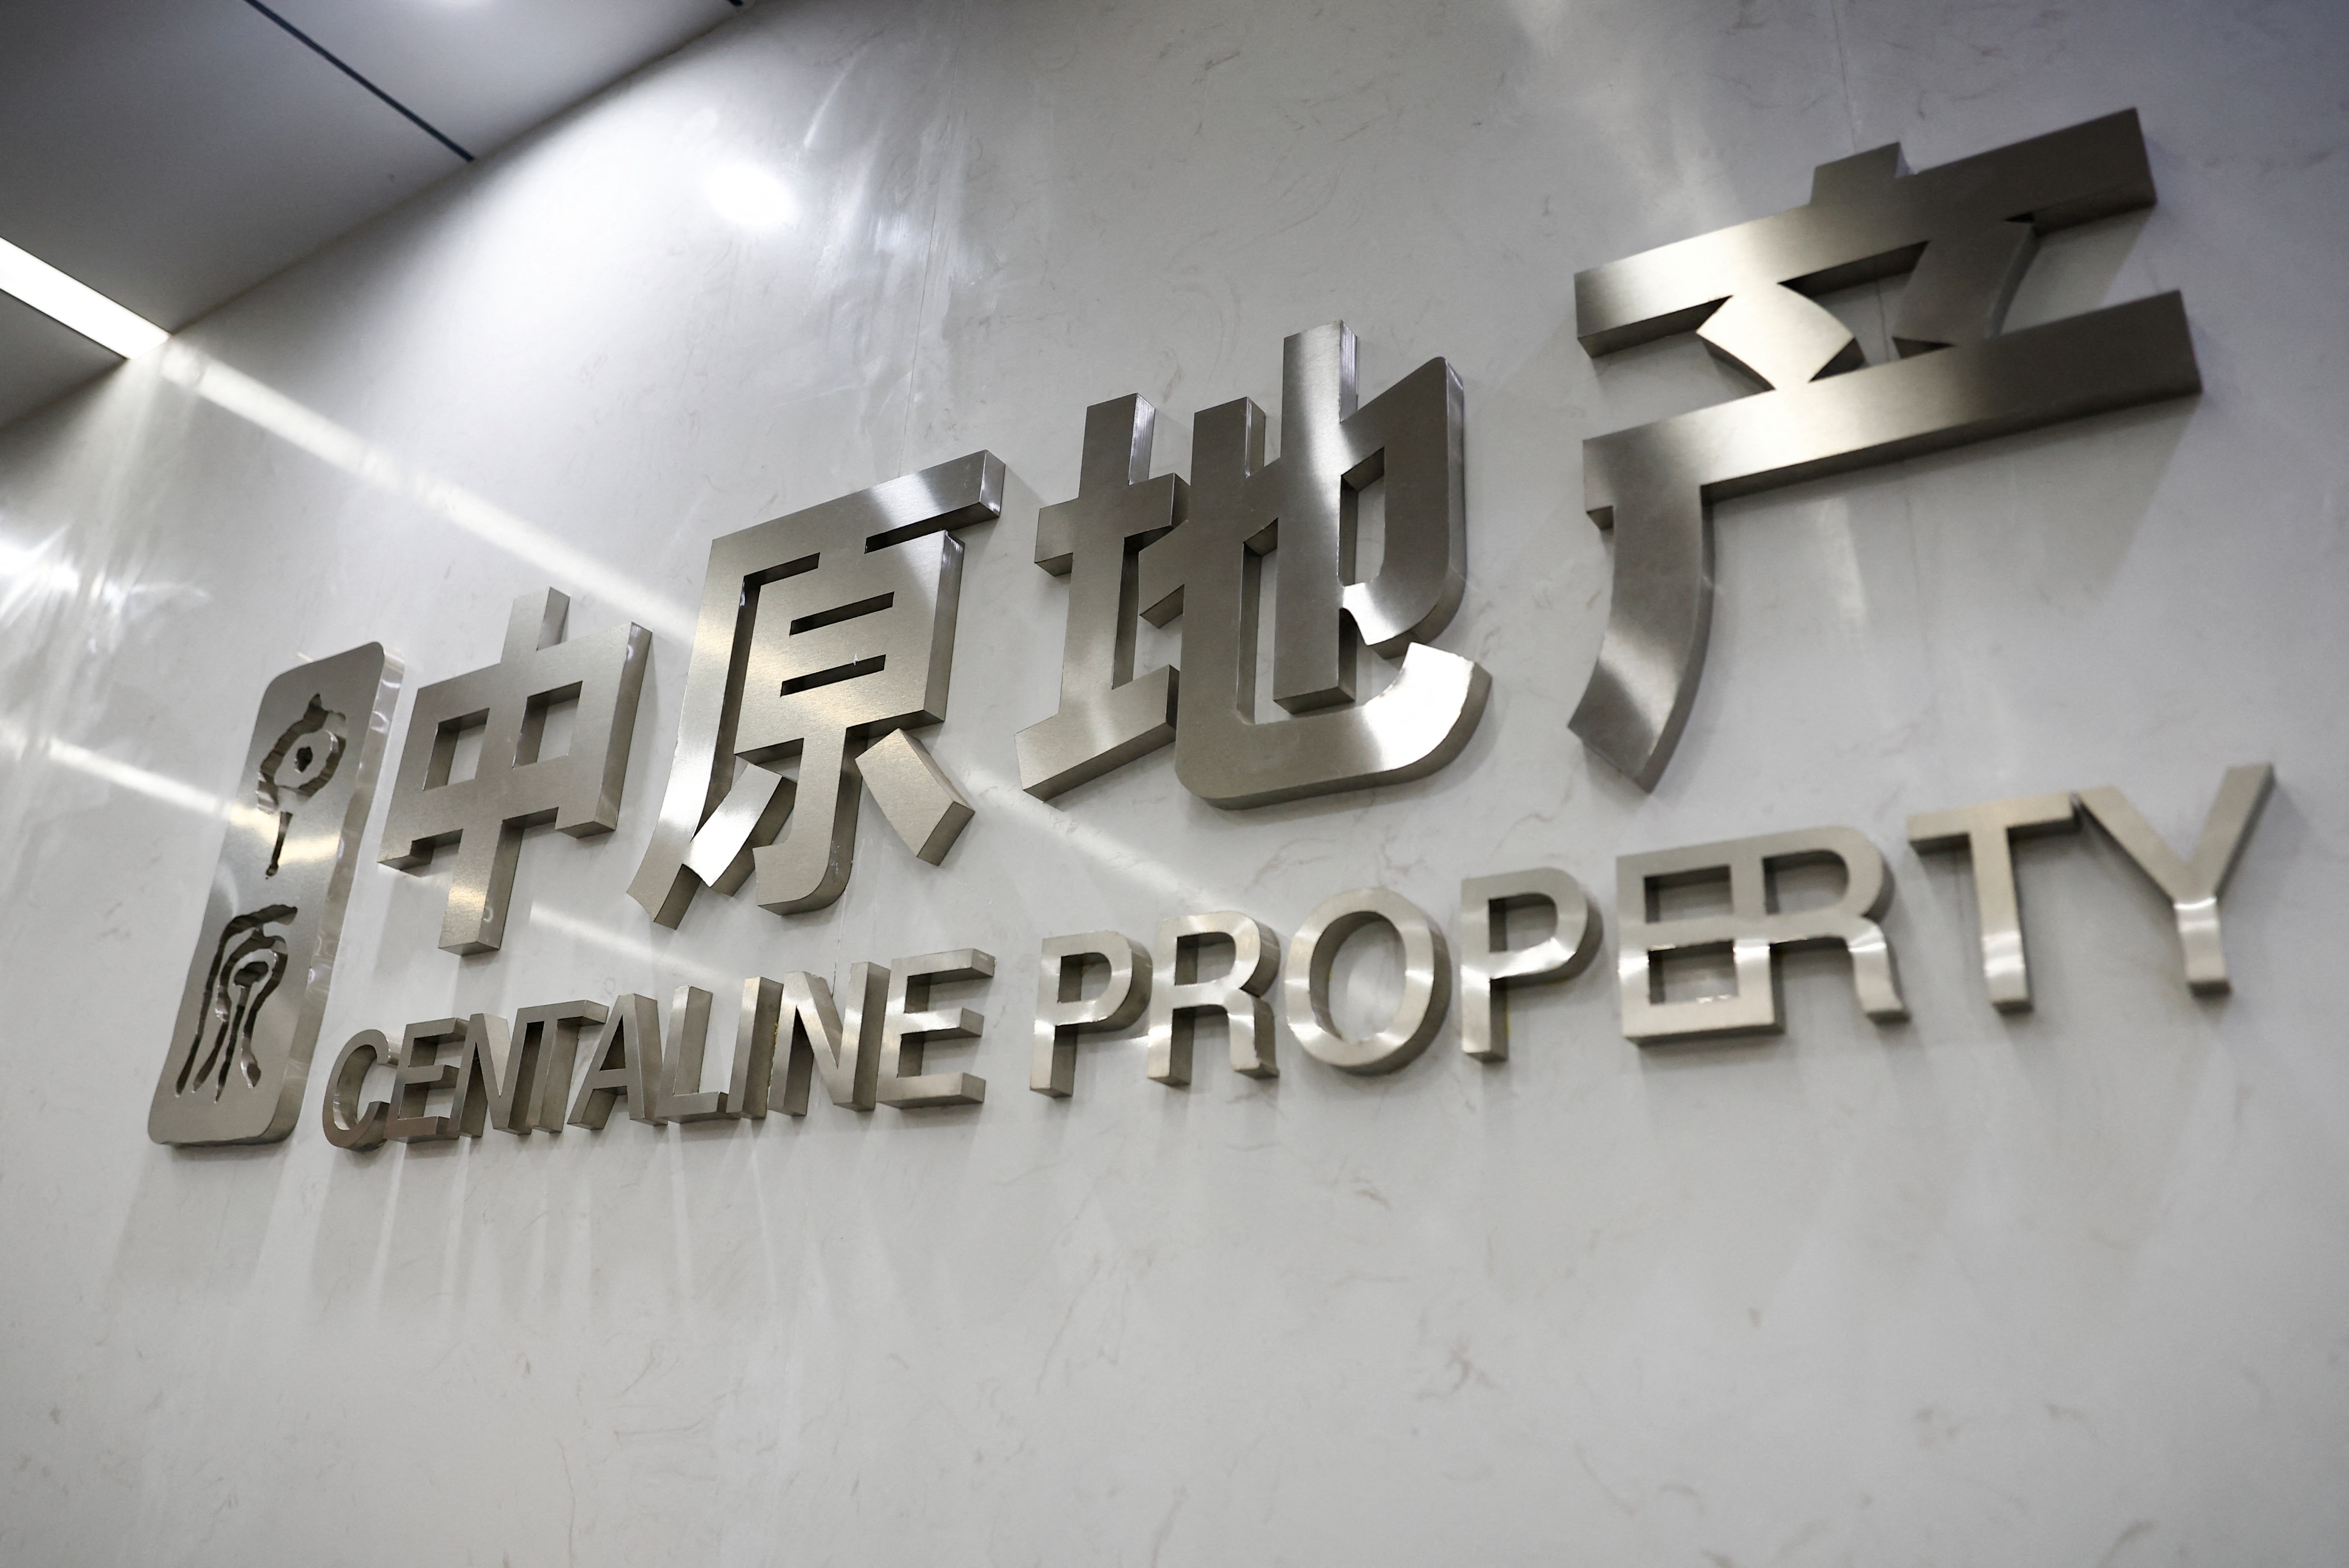 Sign of Centaline Property is pictured at the company's office in Tianjin